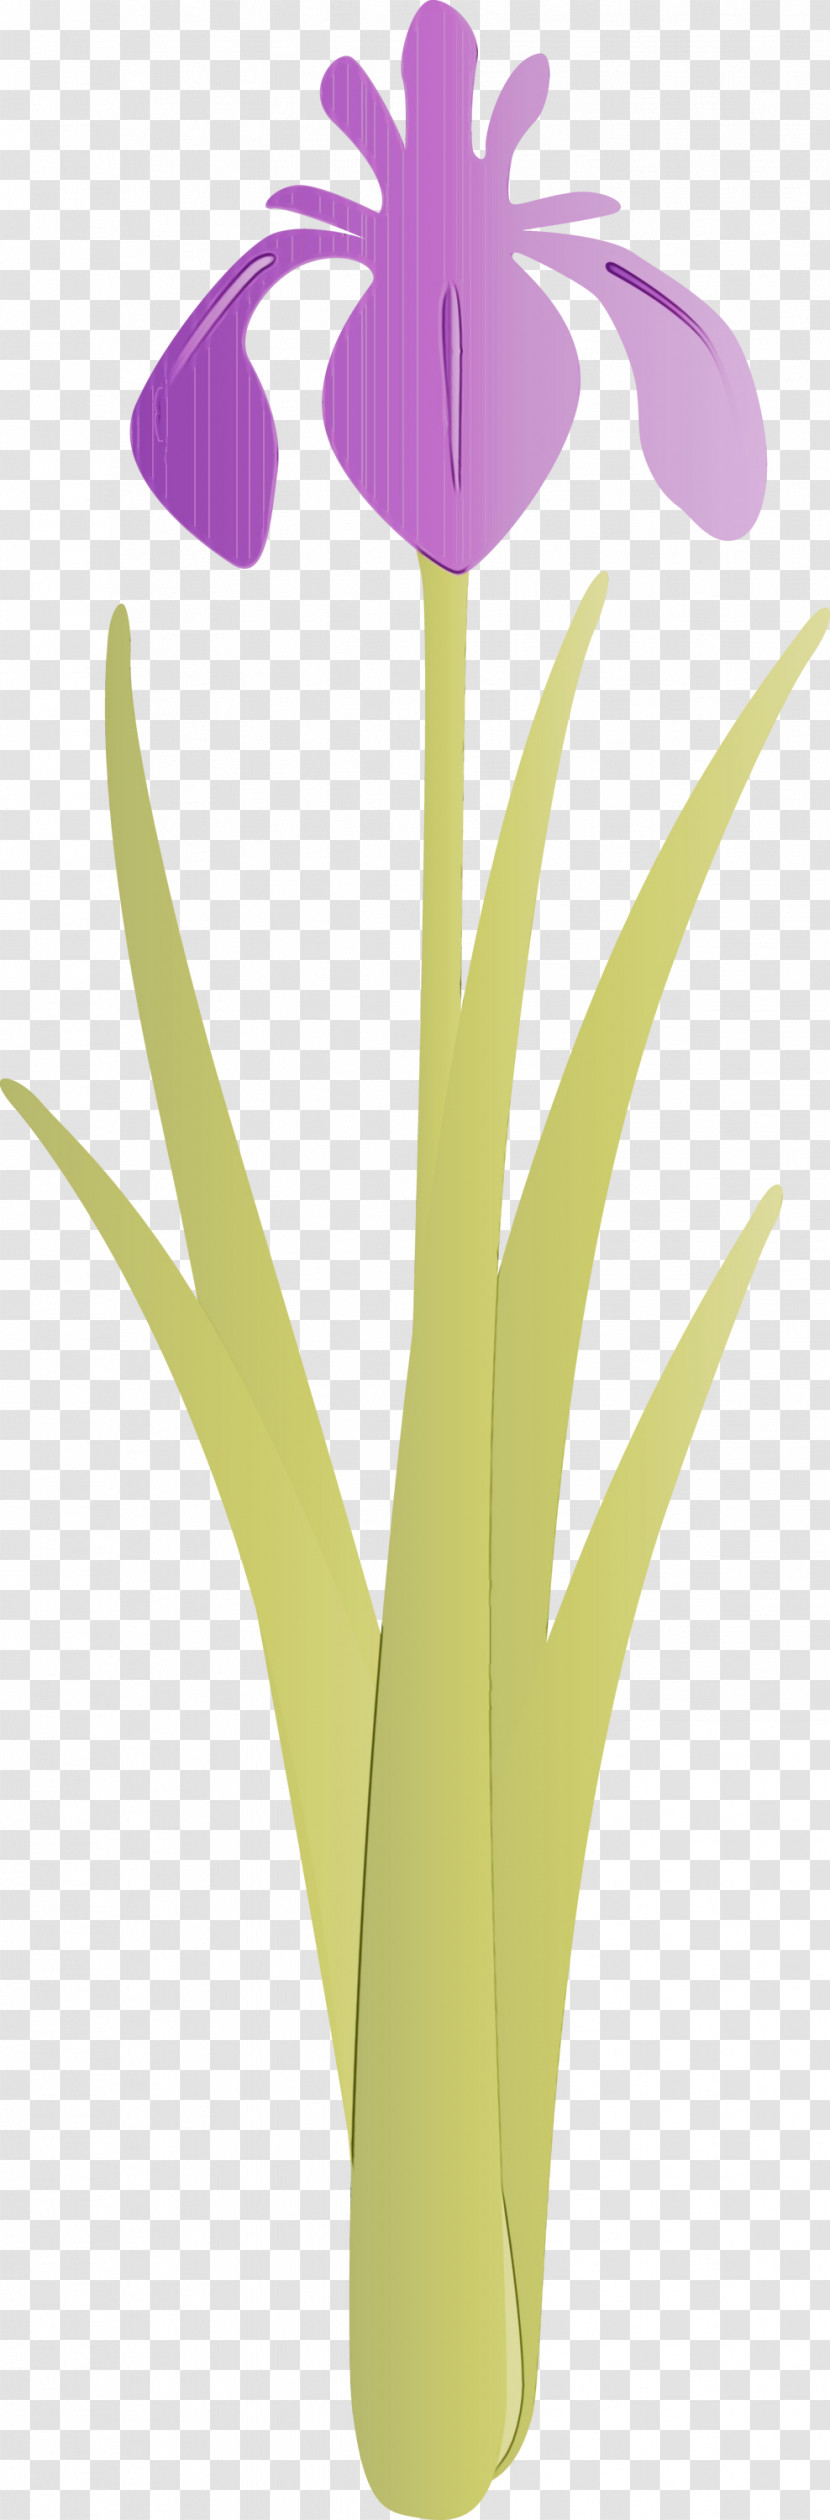 Yellow Leaf Plant Grass Family Flower Transparent PNG